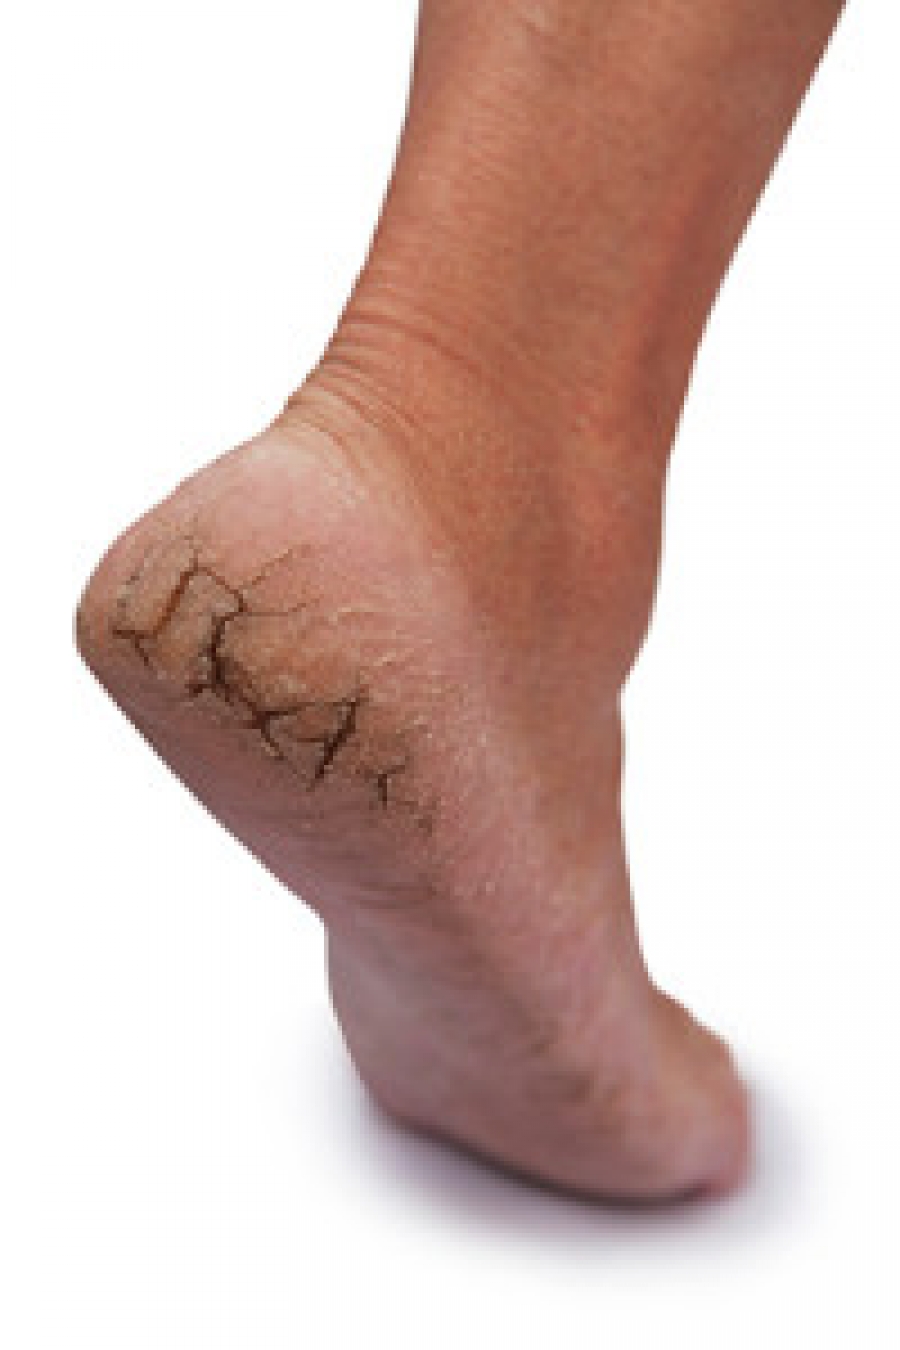 Cracked Heels and Heel Fissures | Foot & Ankle